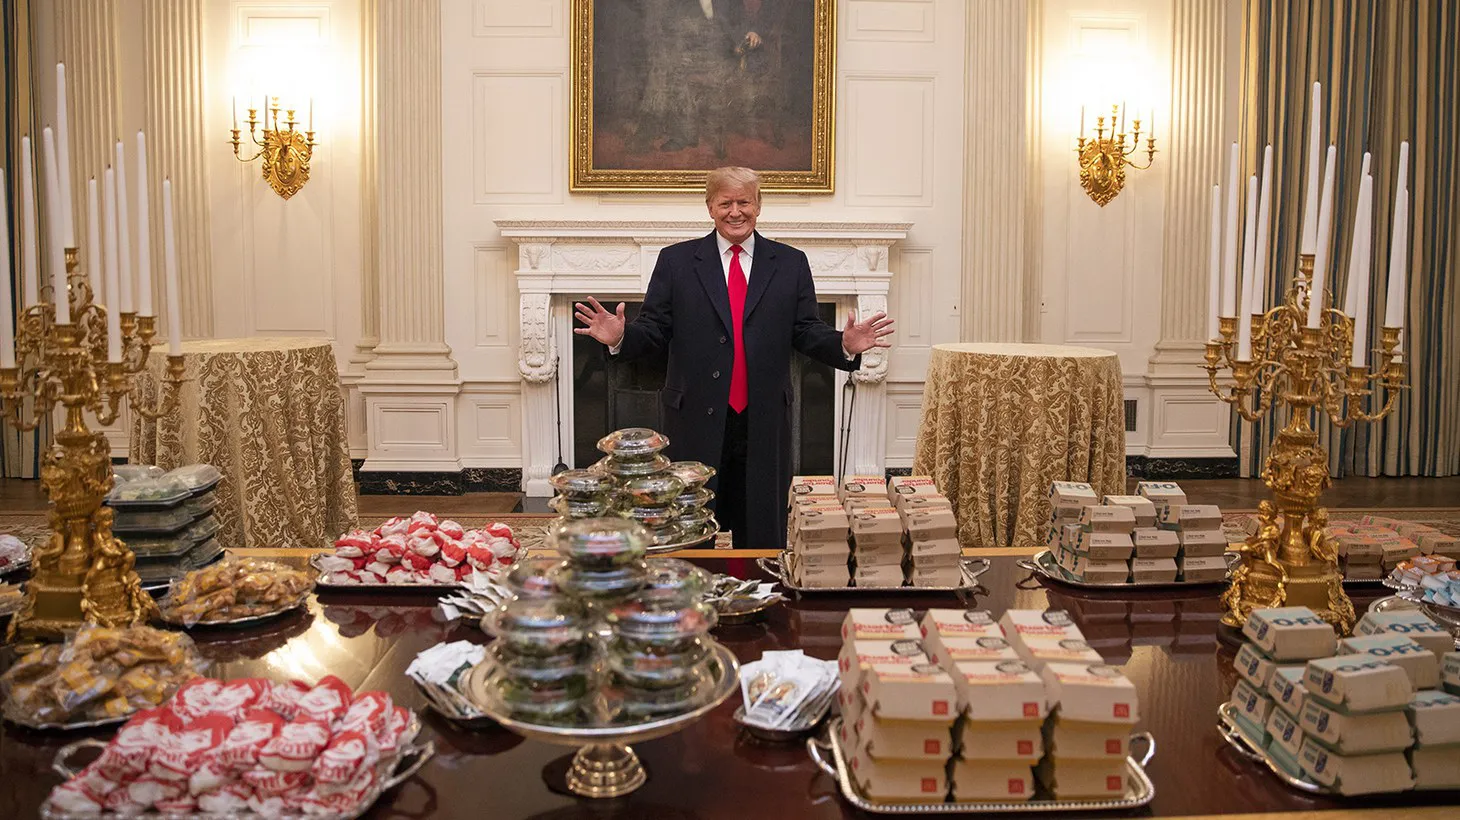 President Donald Trump bought a fast food feast – pizza, hundreds of hamburgers, and boxes of french fries – to celebrate the Clemson football team’s national championship win during the government shutdown in 2019. Credit: Official White House.